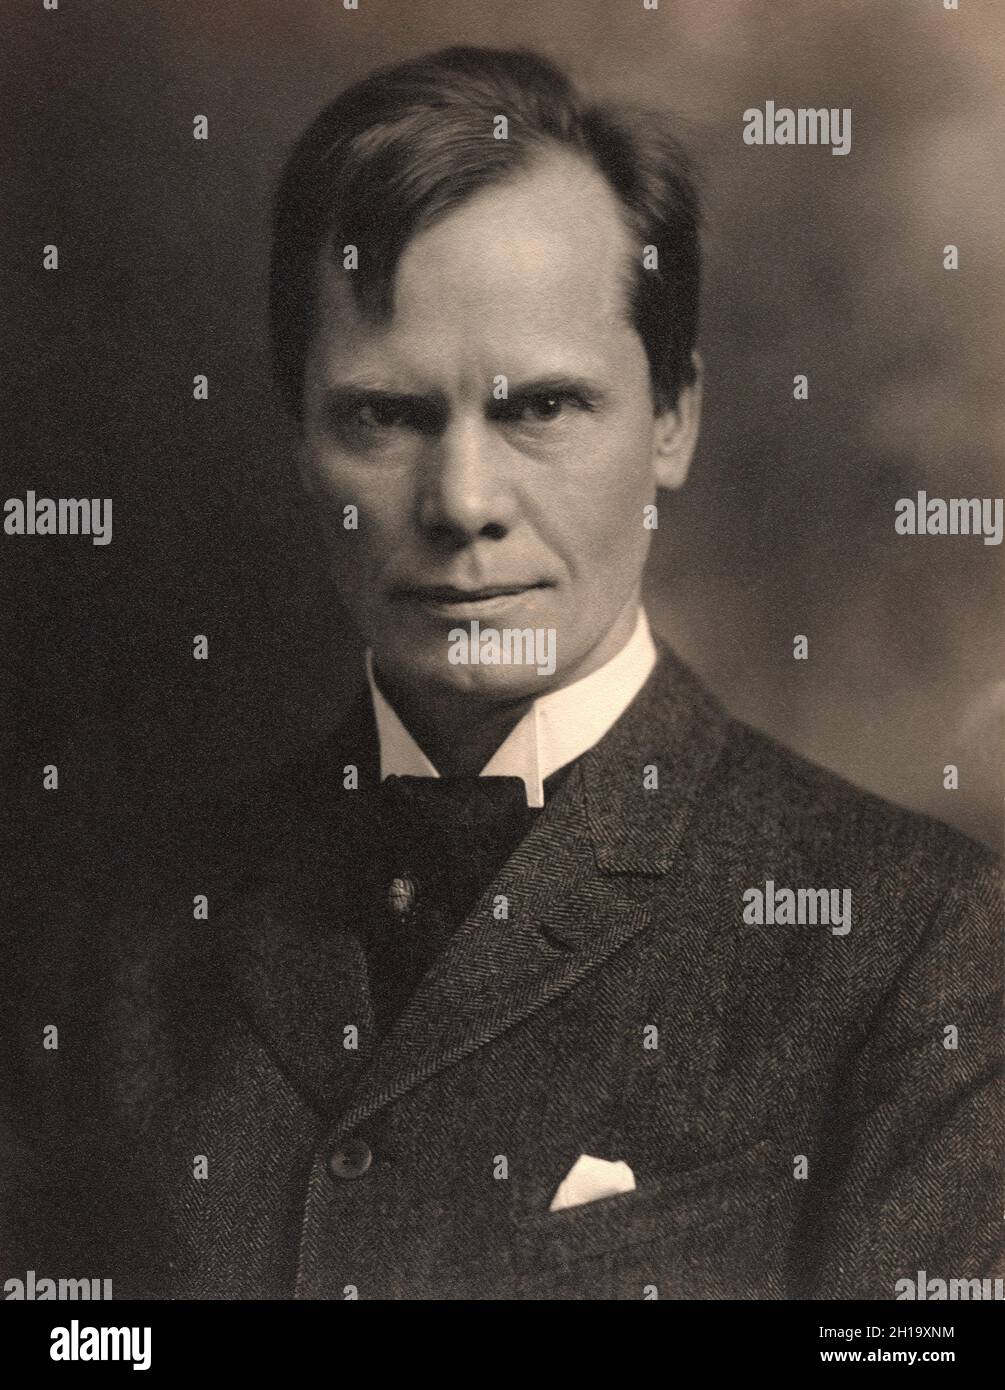 William Sulzer (1863-1941), American Politician, Governor of New York 1913-1913, U.S. House of Representative from New York 1895-1912, only New York Governor to be impeached and convicted on Articles of Impeachment, head and shoulders Portrait, Pach Brothers Studio, 1905 Stock Photo